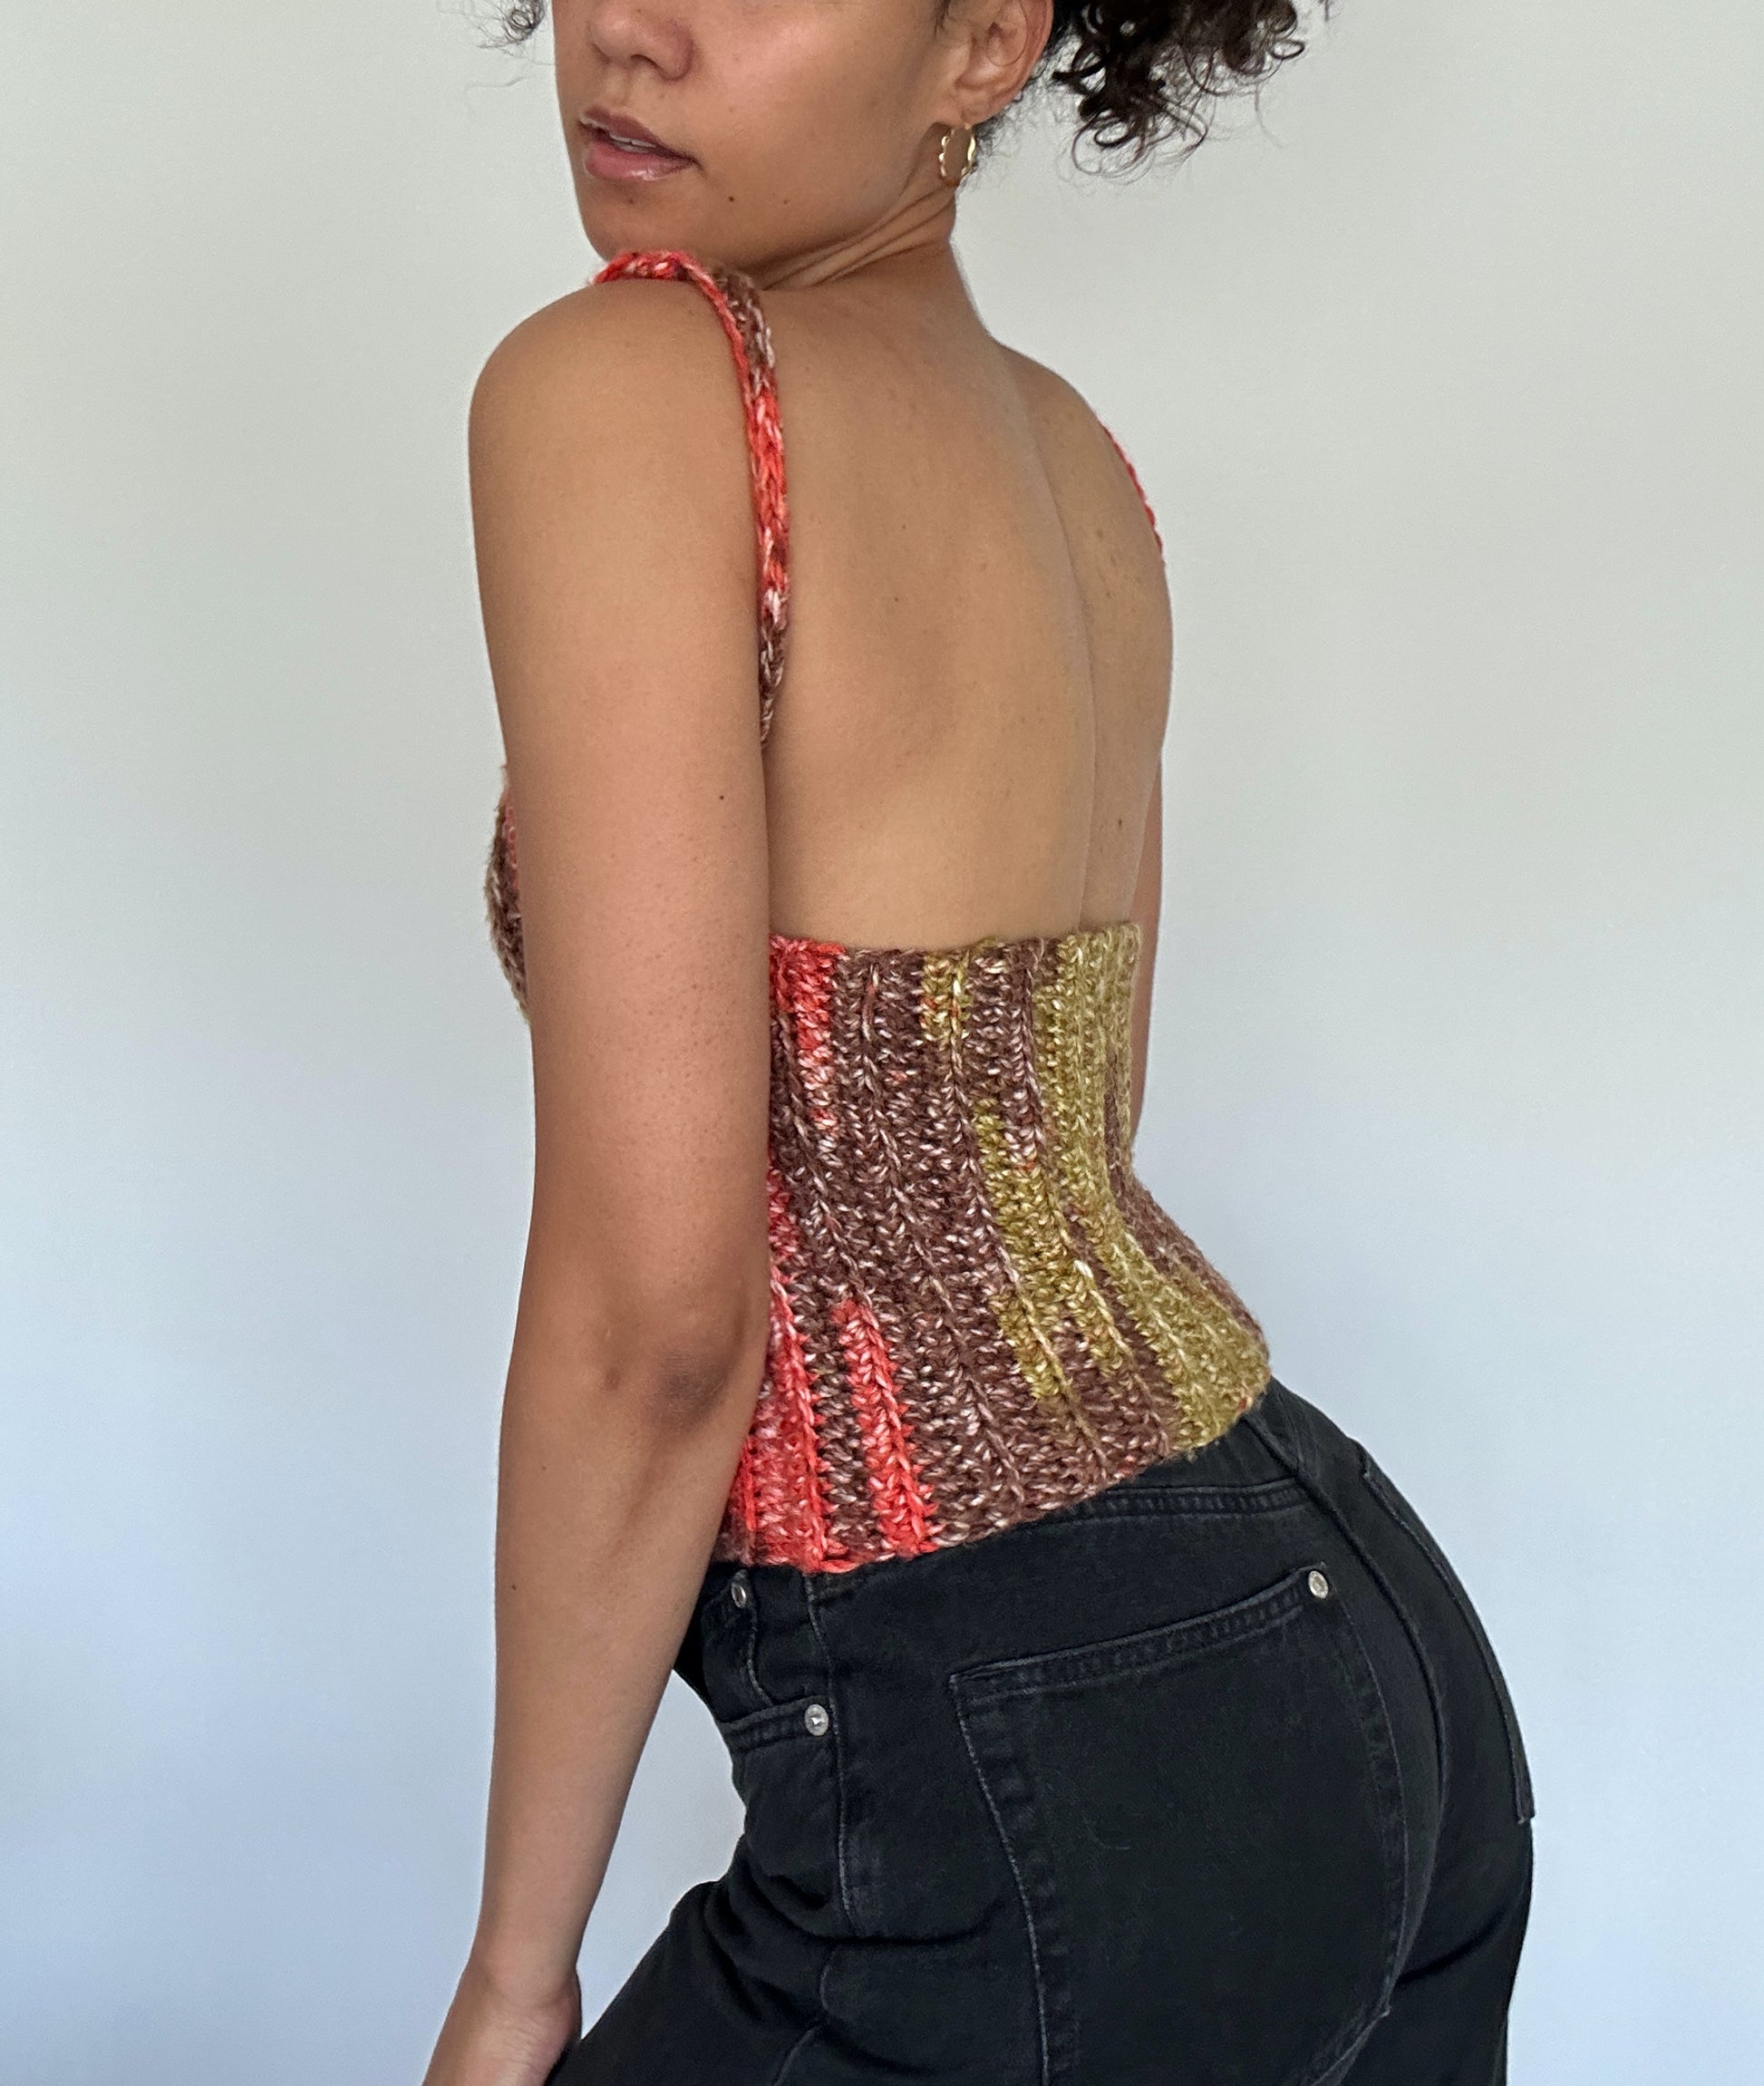 Shows a model wearing the crocheted NORA Open Back Top, which has a low cut open back and covered front in the colors brown, green and orange. Made by The Woollers